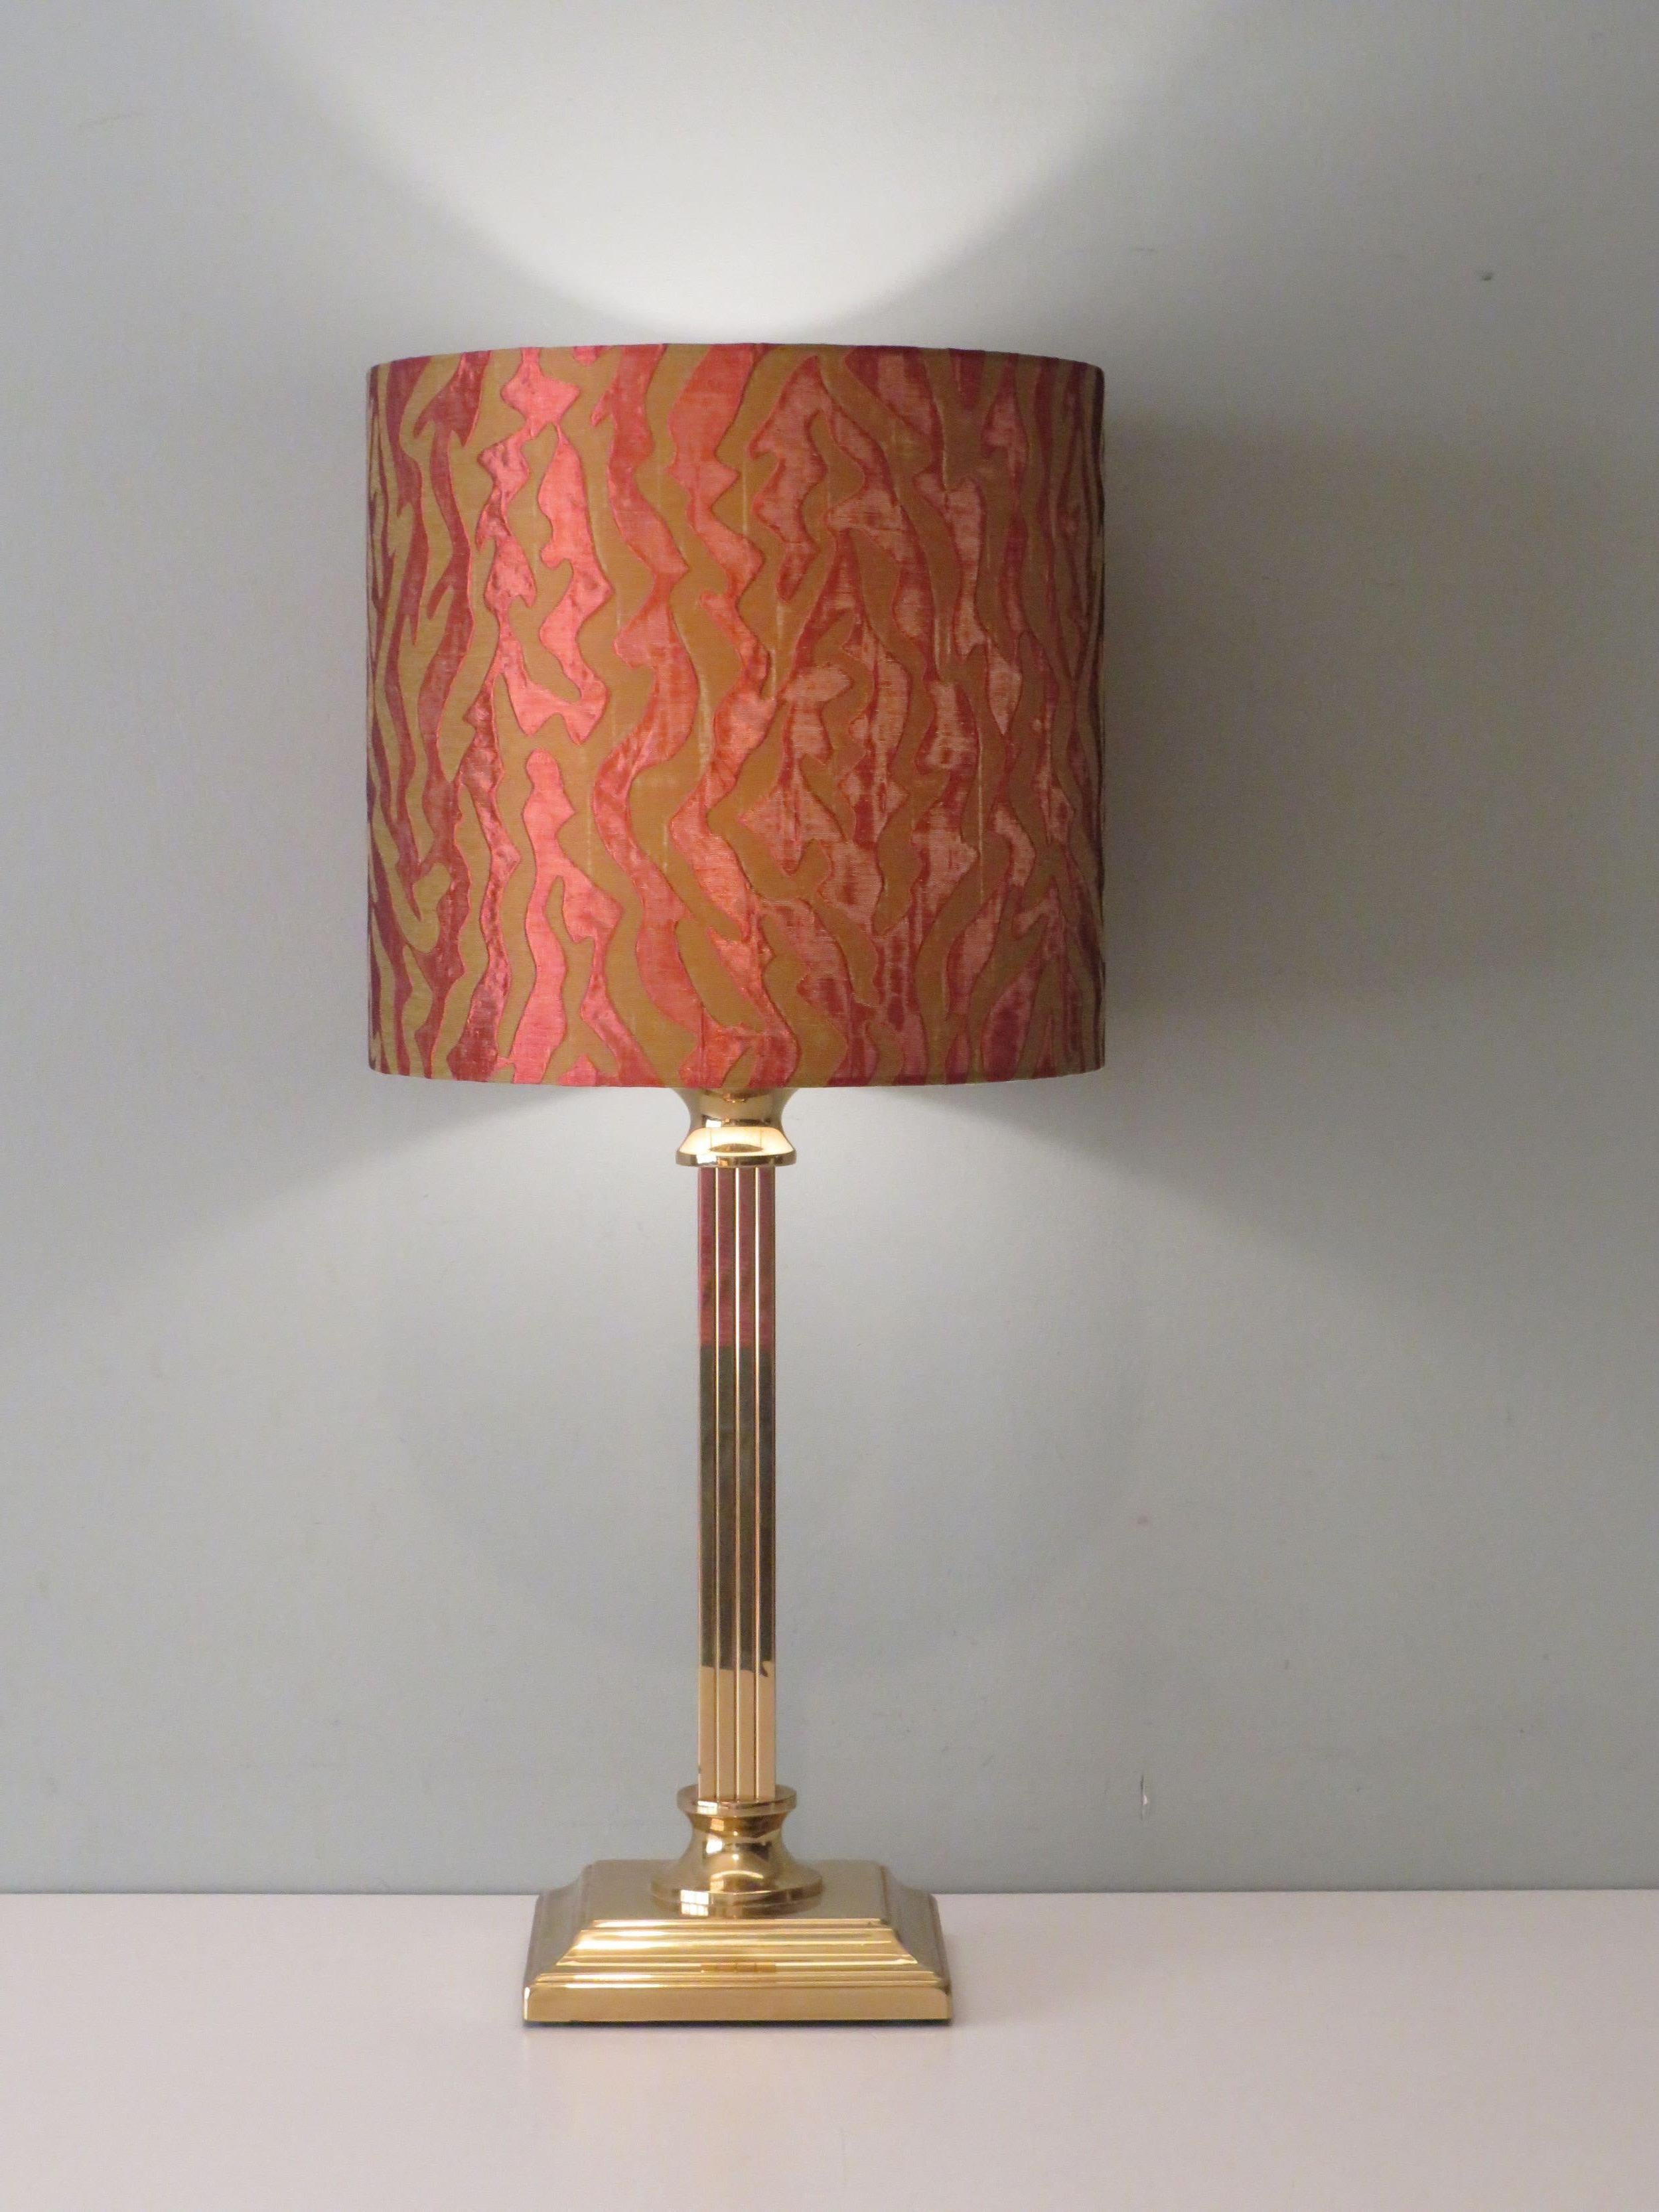 This beautiful sleek brass table lamp is equipped with a new,
custom lampshade in jacquard fabric.
The lamp is equipped with 1 E 27 fitting, gold-coloured cord, gold-coloured on and off button and plug.
Dimensions lamp base: H 44 cm L 17.5 cm and